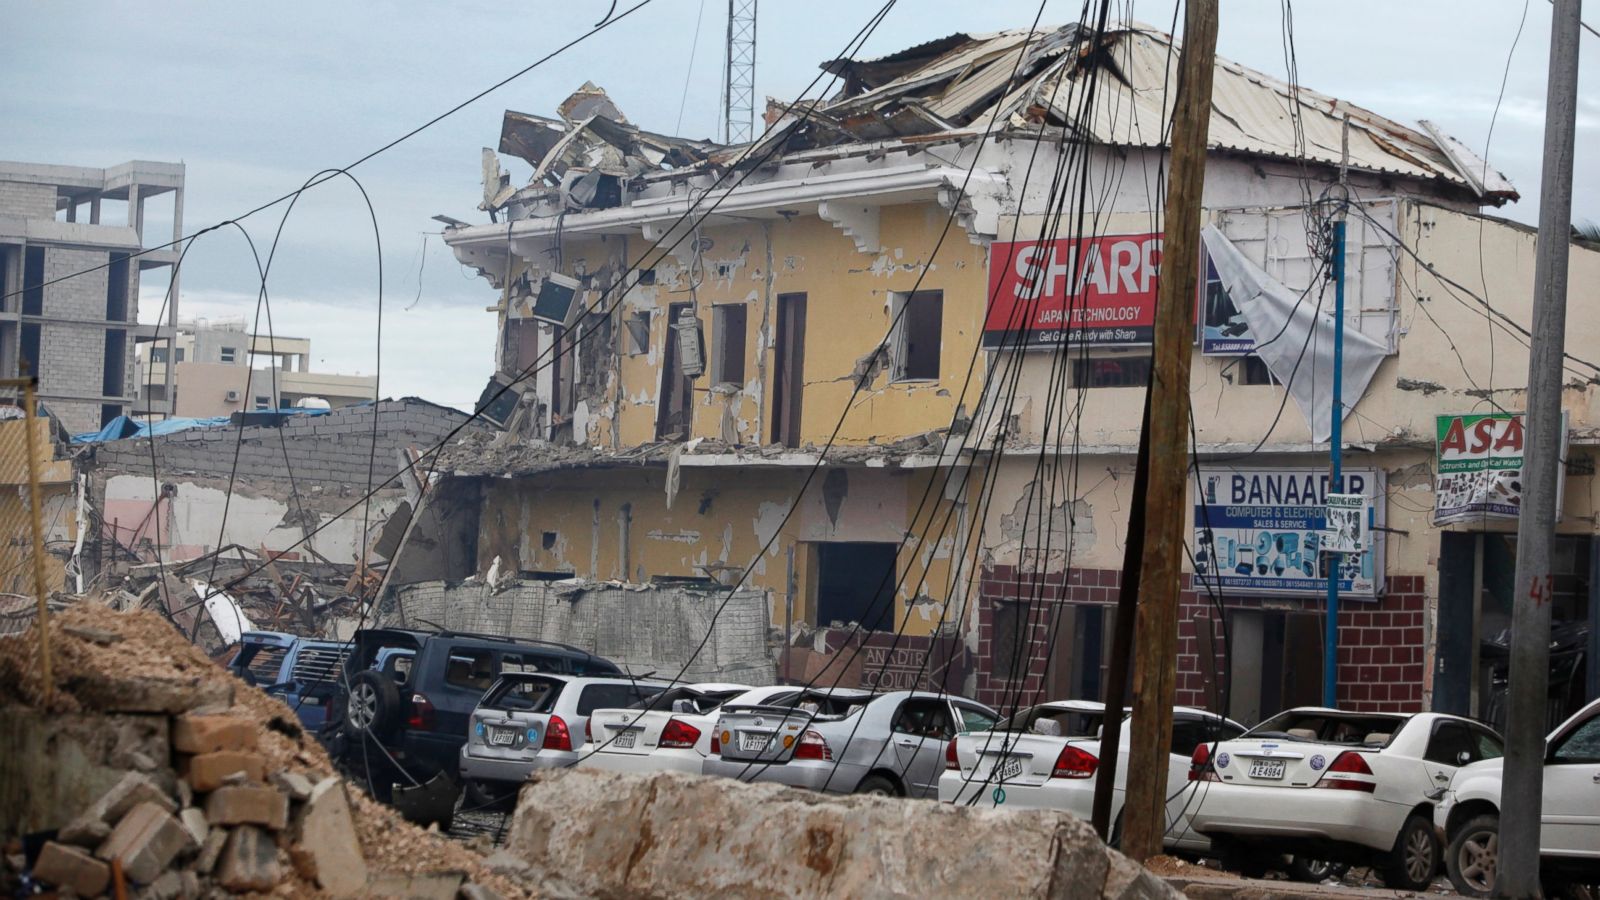 A view of the Nasahablod Hotel, destroyed after a bomb attack in Mogadishu, Somalia, Saturday, June 25, 2016. A Somali police officer says a suicide car bomber detonated an explosives-laden vehicle at the gate of a hotel in Mogadishu followed by gunmen who were fighting their way into the hotel..(AP Photo/Farah Abdi Warsameh)